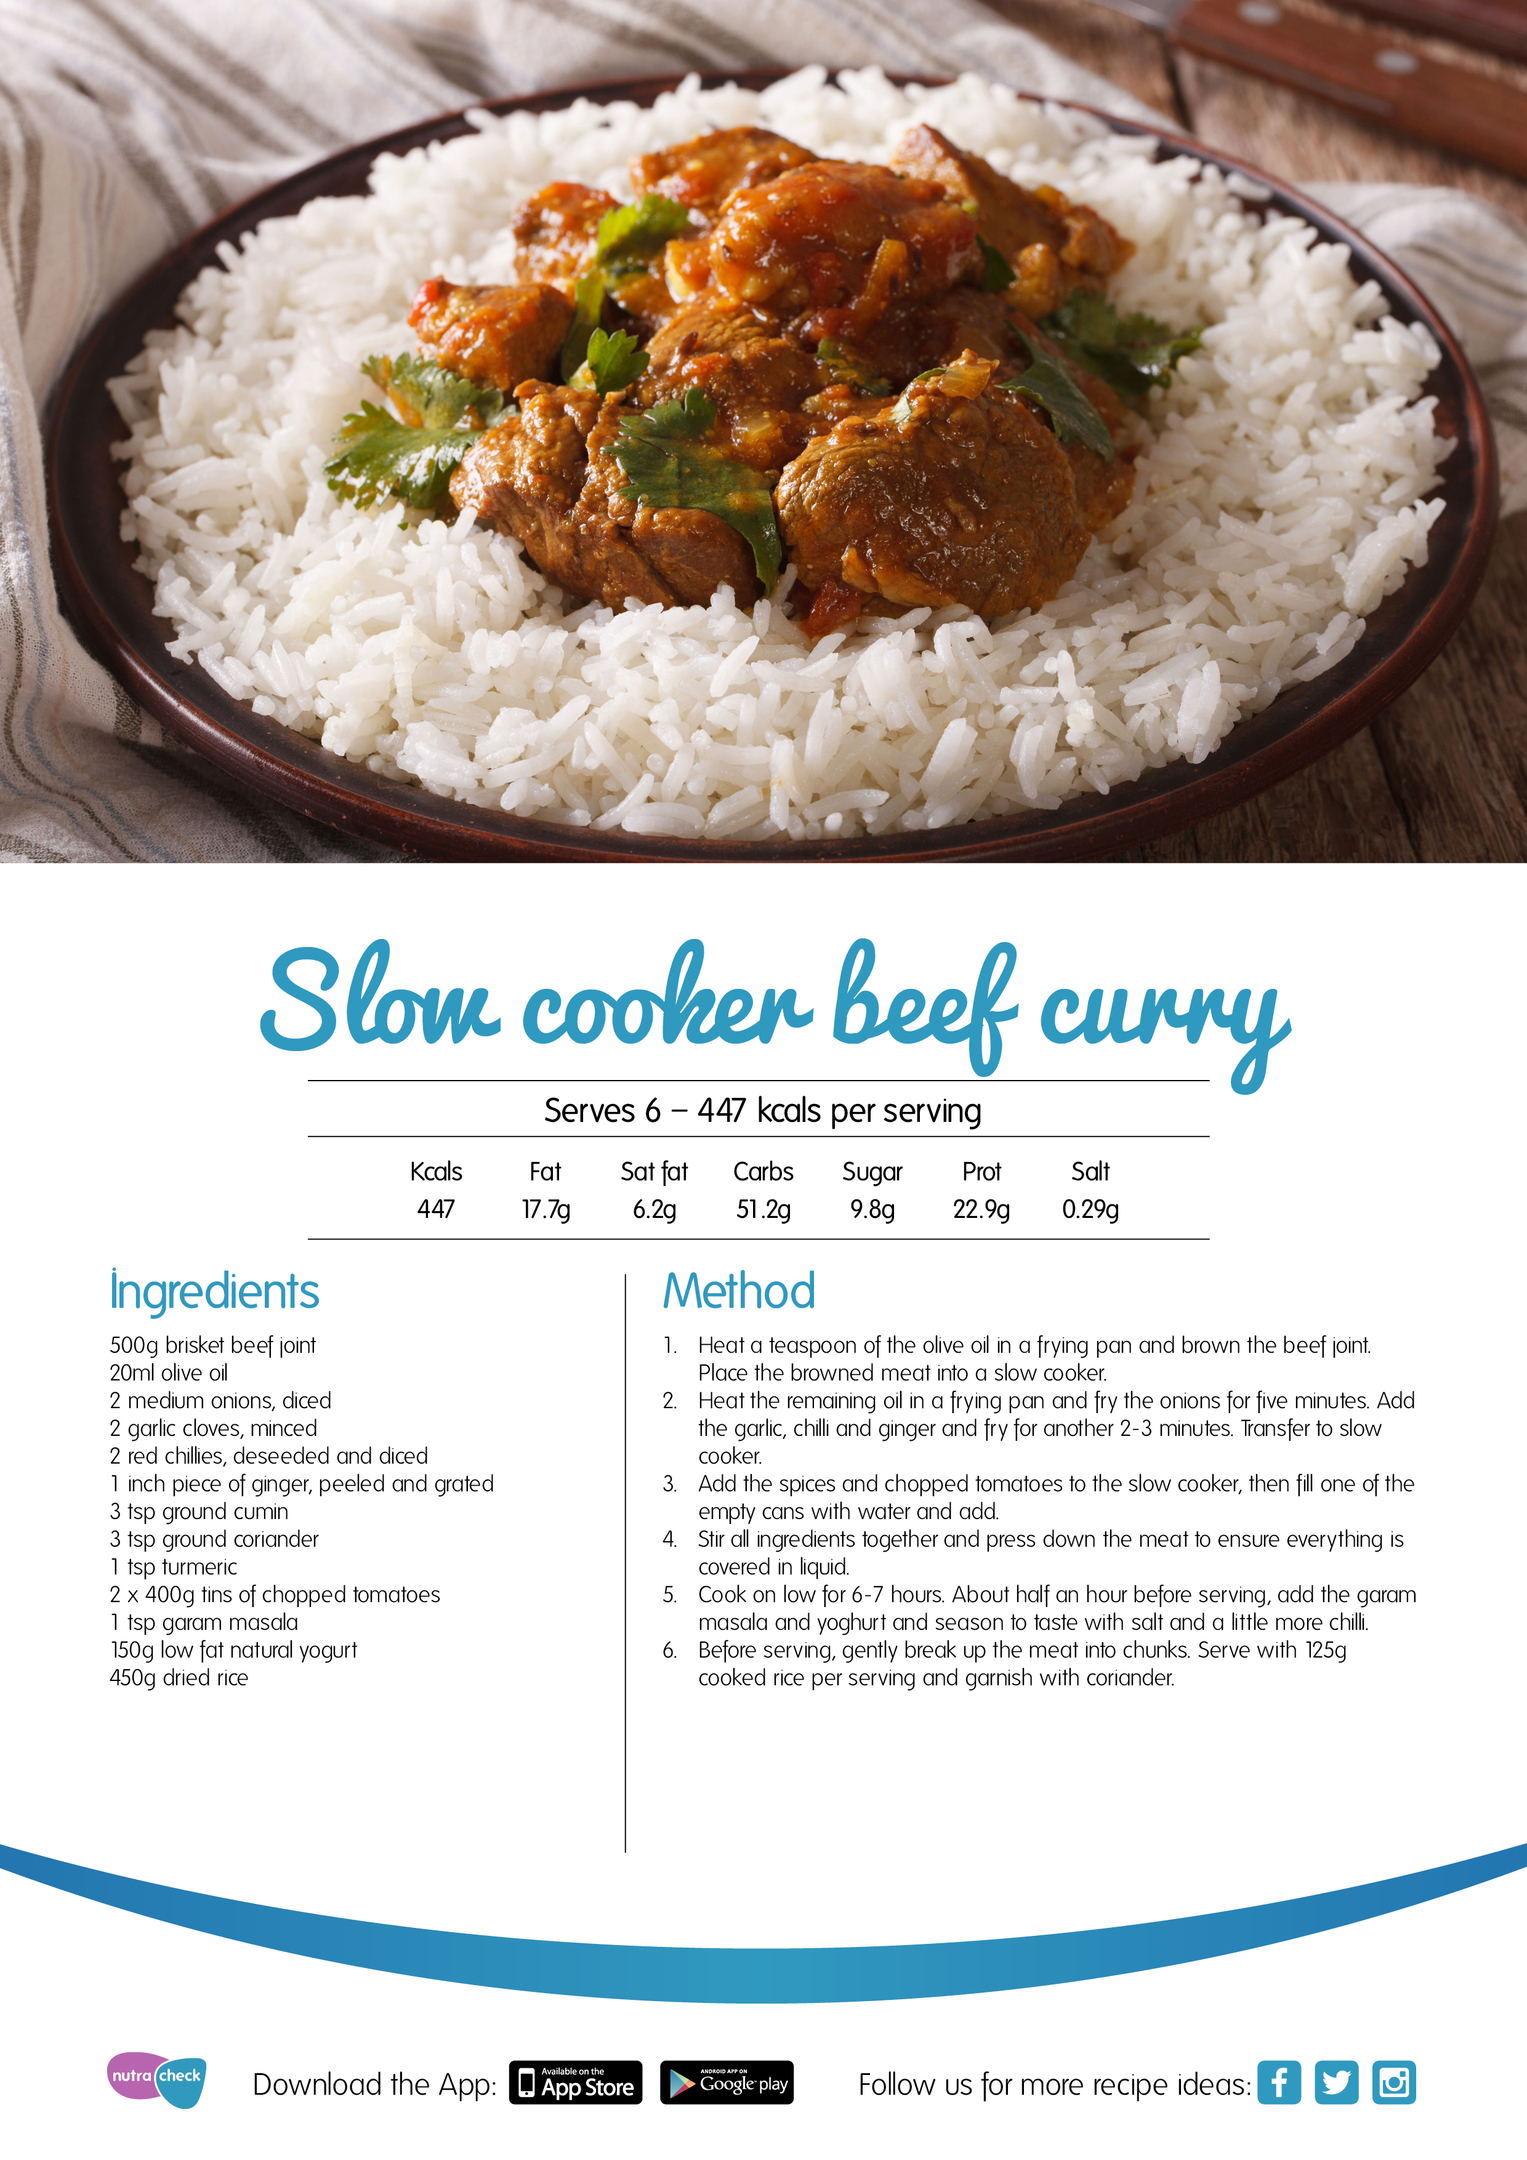 Slow cooker beef curry